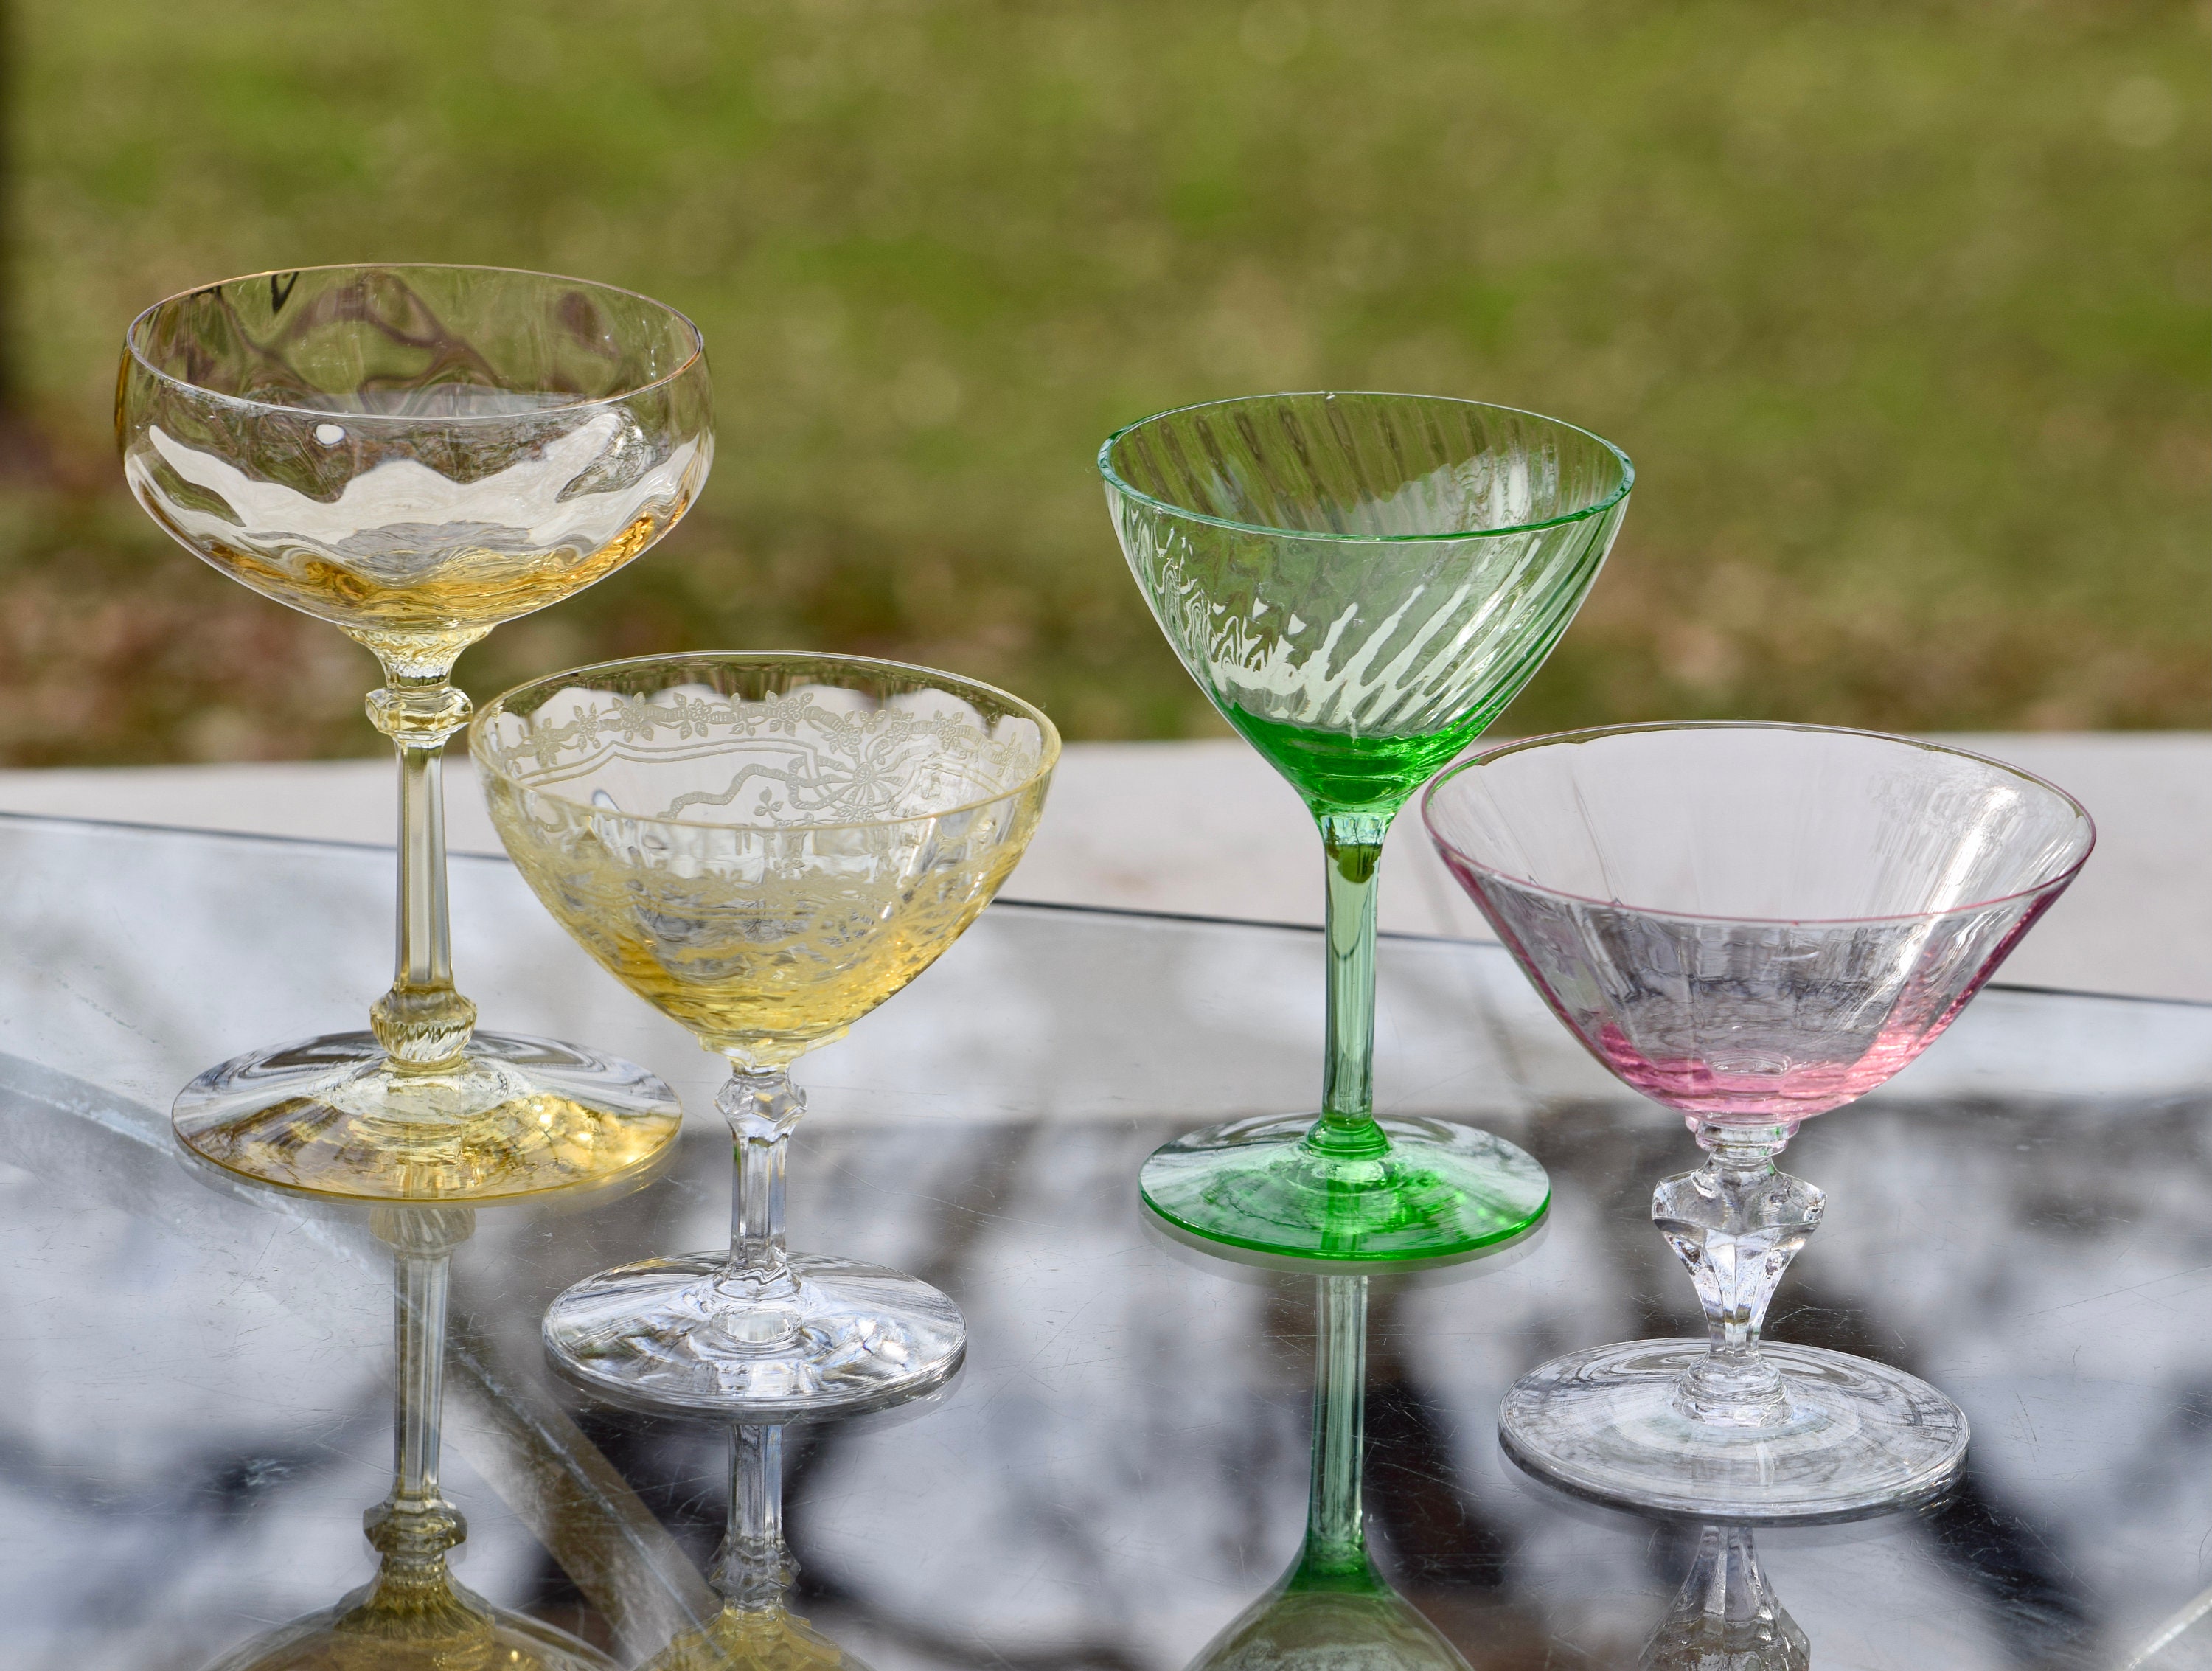 6 Vintage Multi Colored Cocktail Glasses, Nick and Nora, Champagne